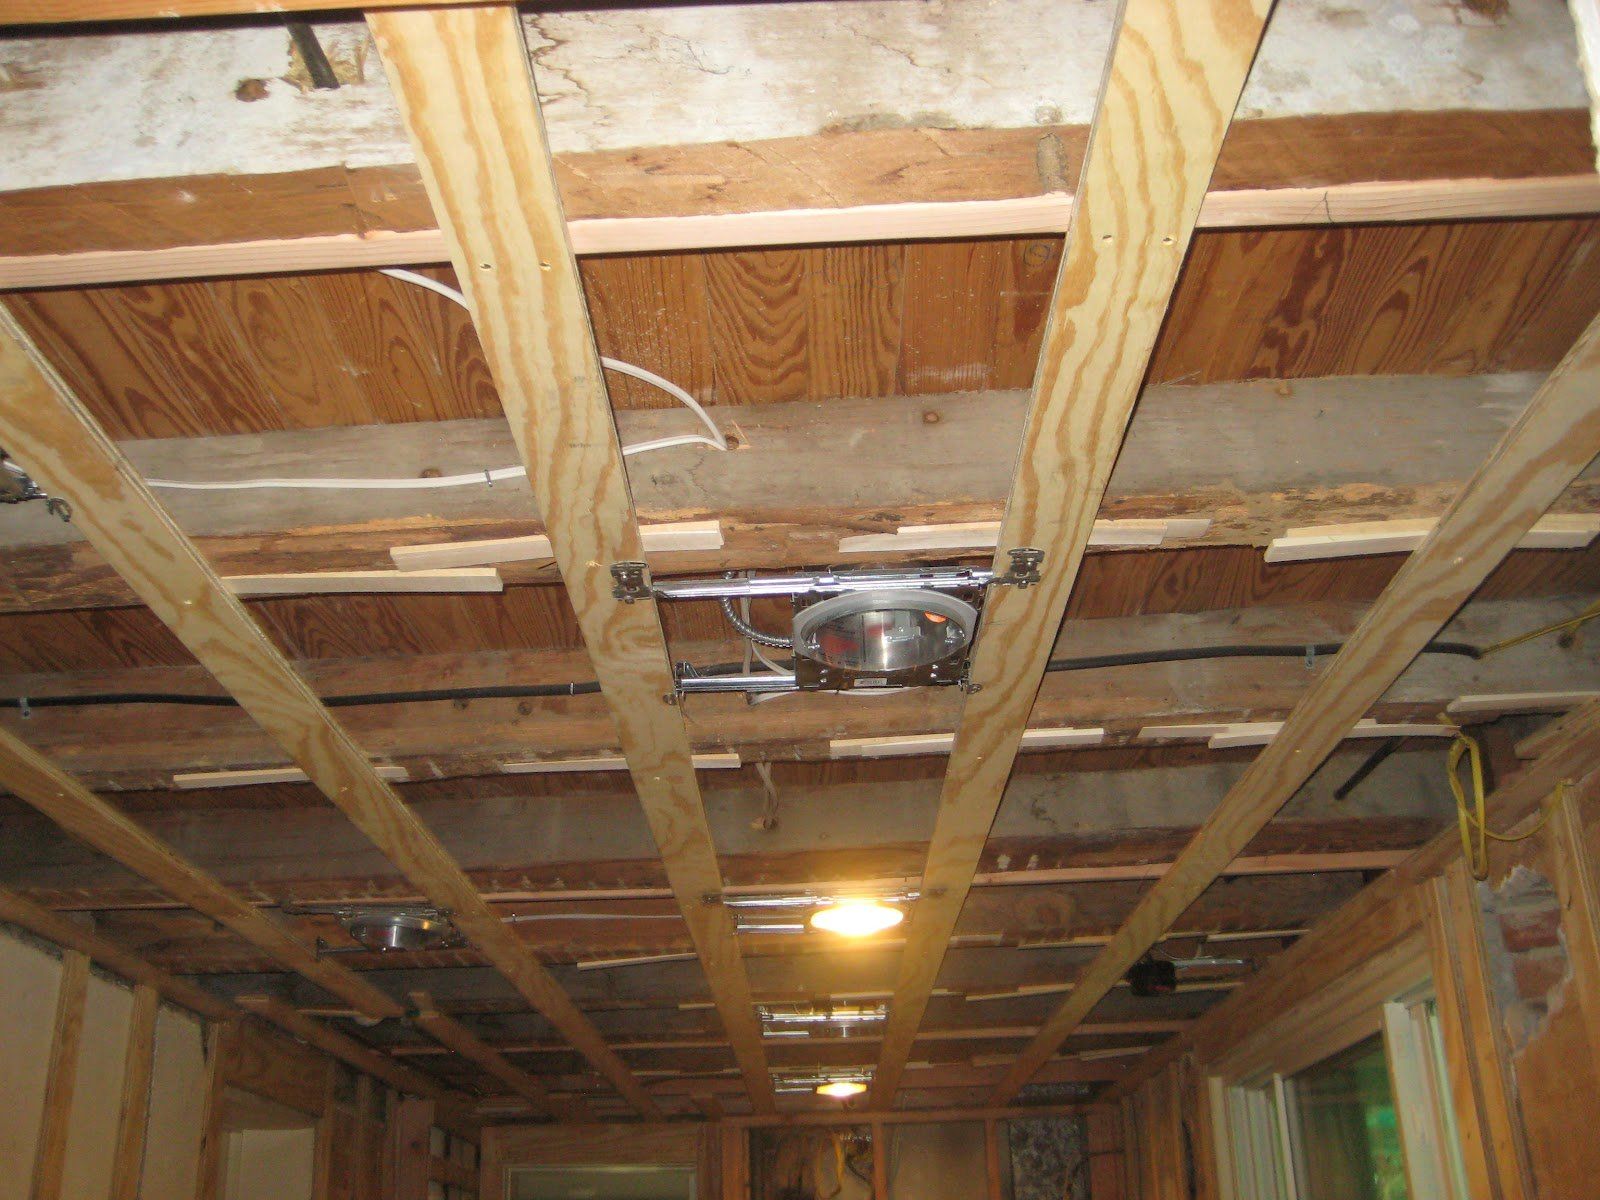 Soundproofing Ceiling packers to level joists